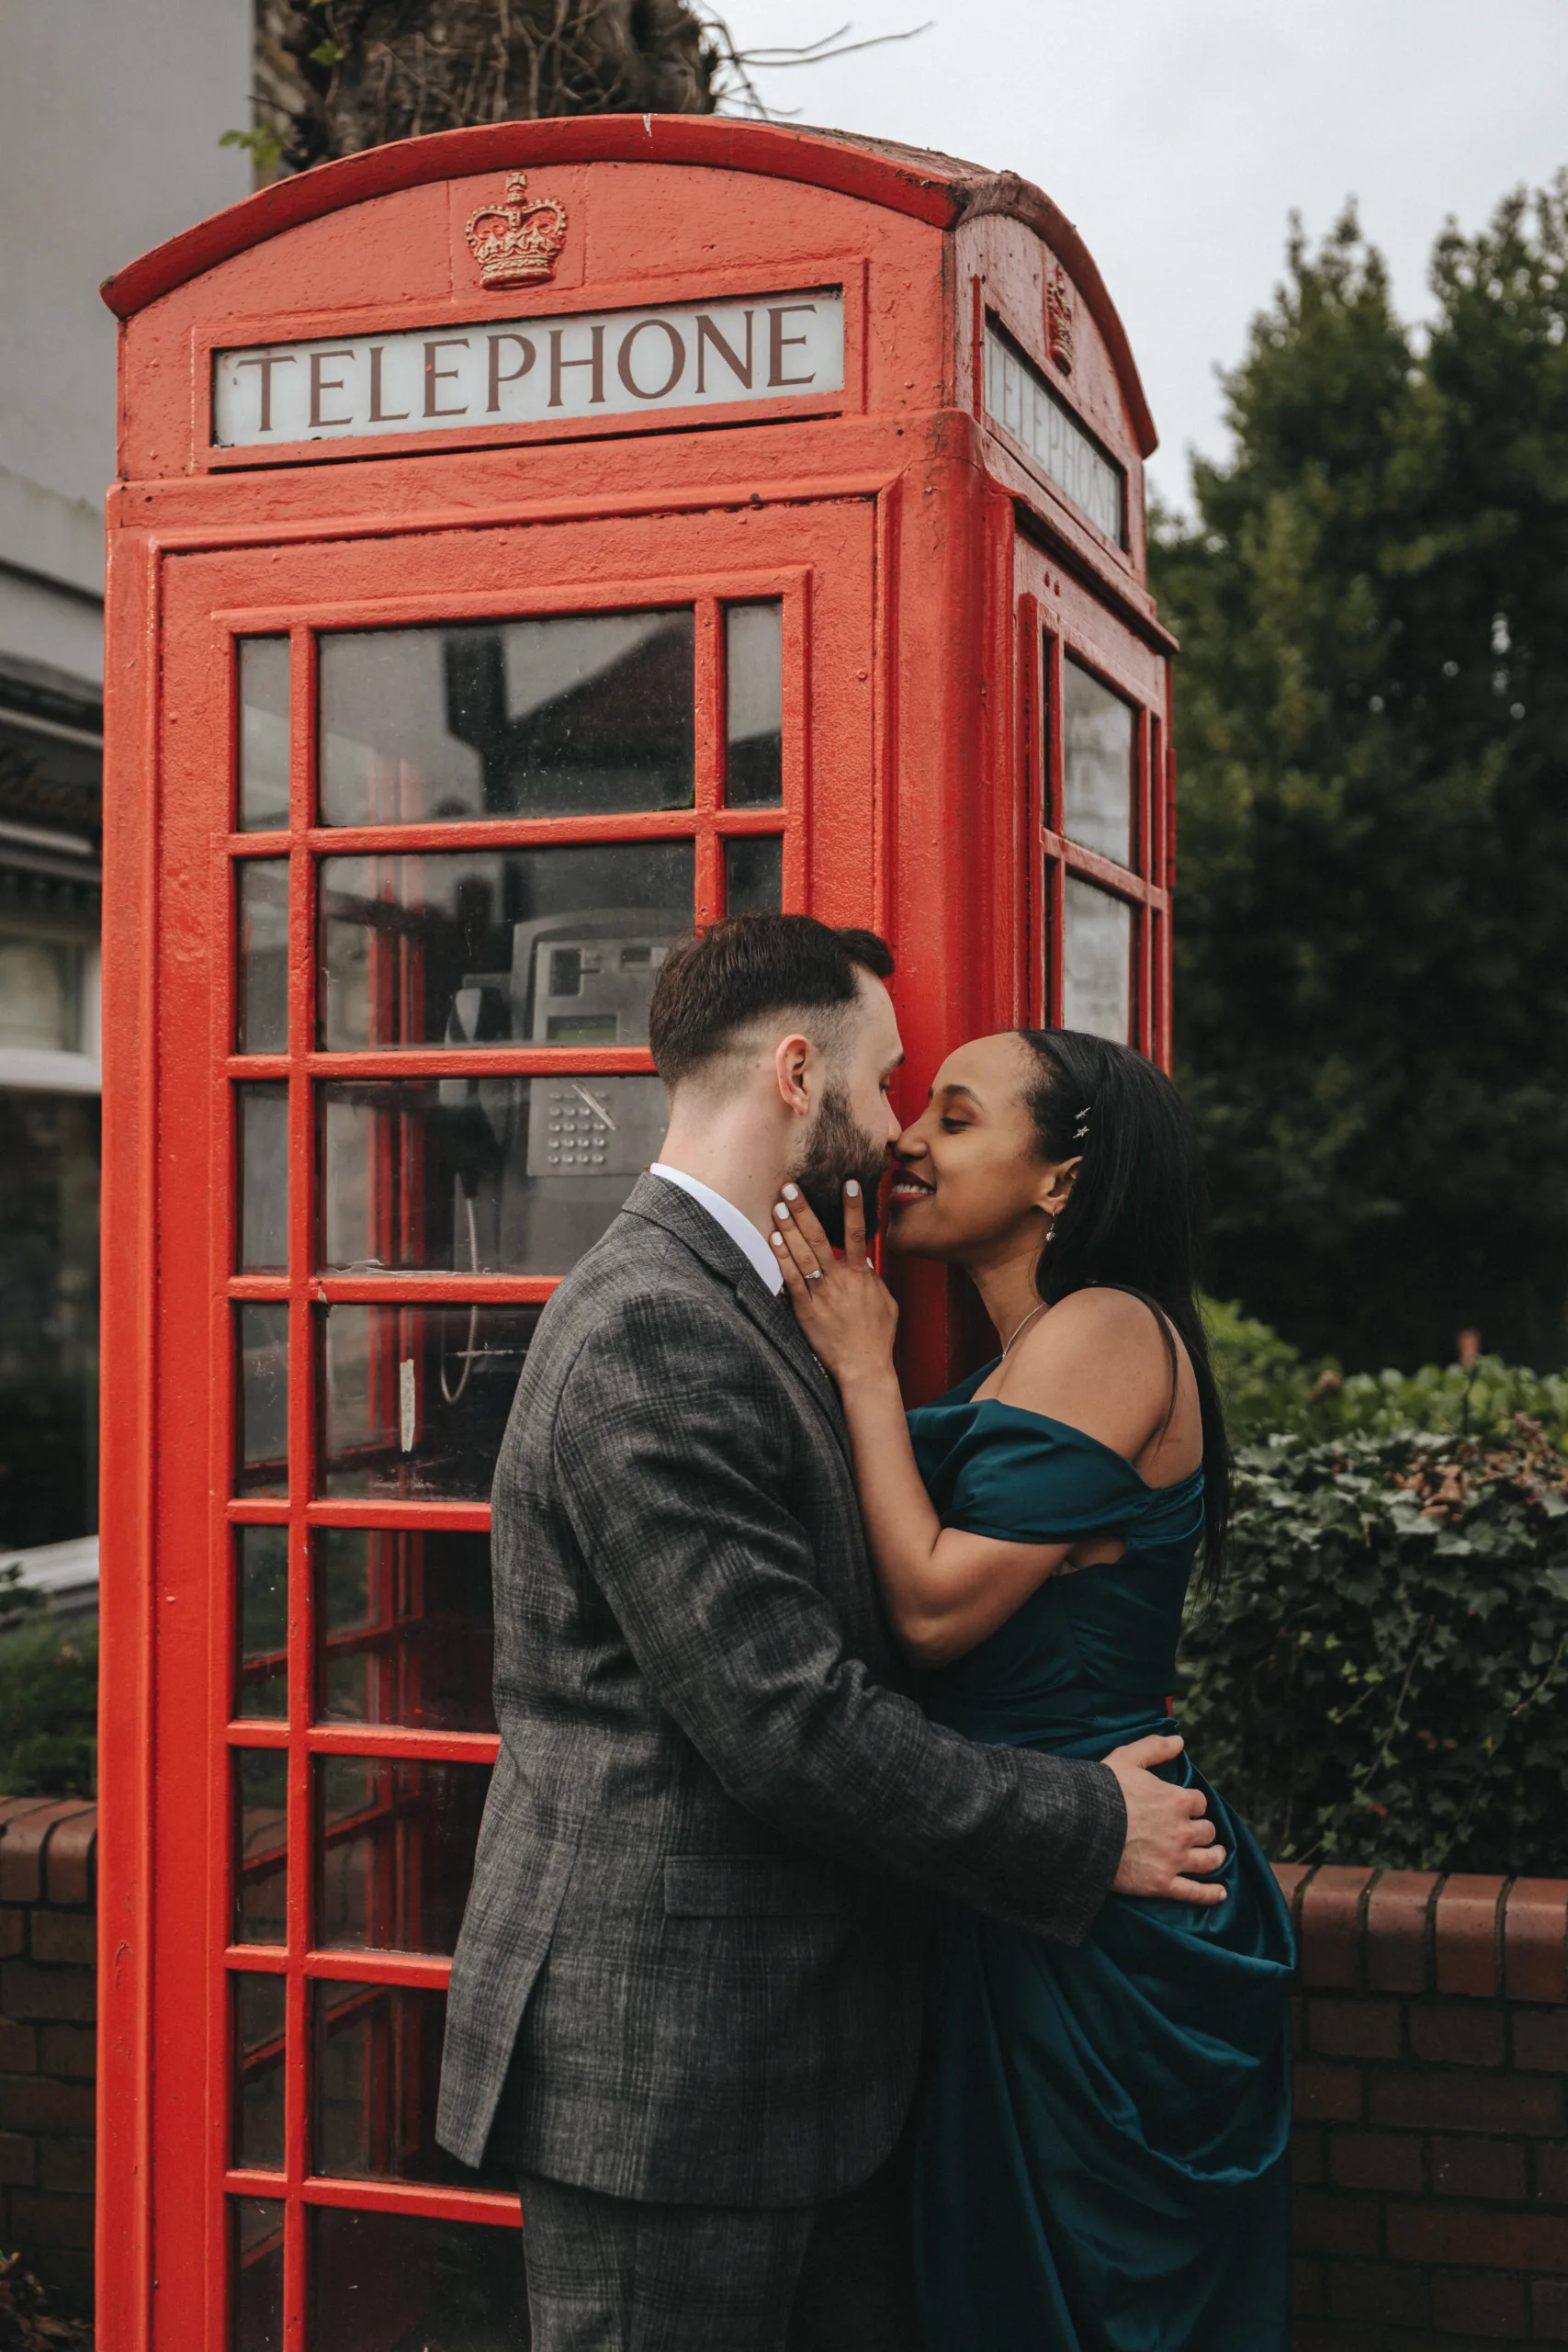 An engaged couple kissing in front of a red telephone booth, captured by a photographer in Yorkshire.